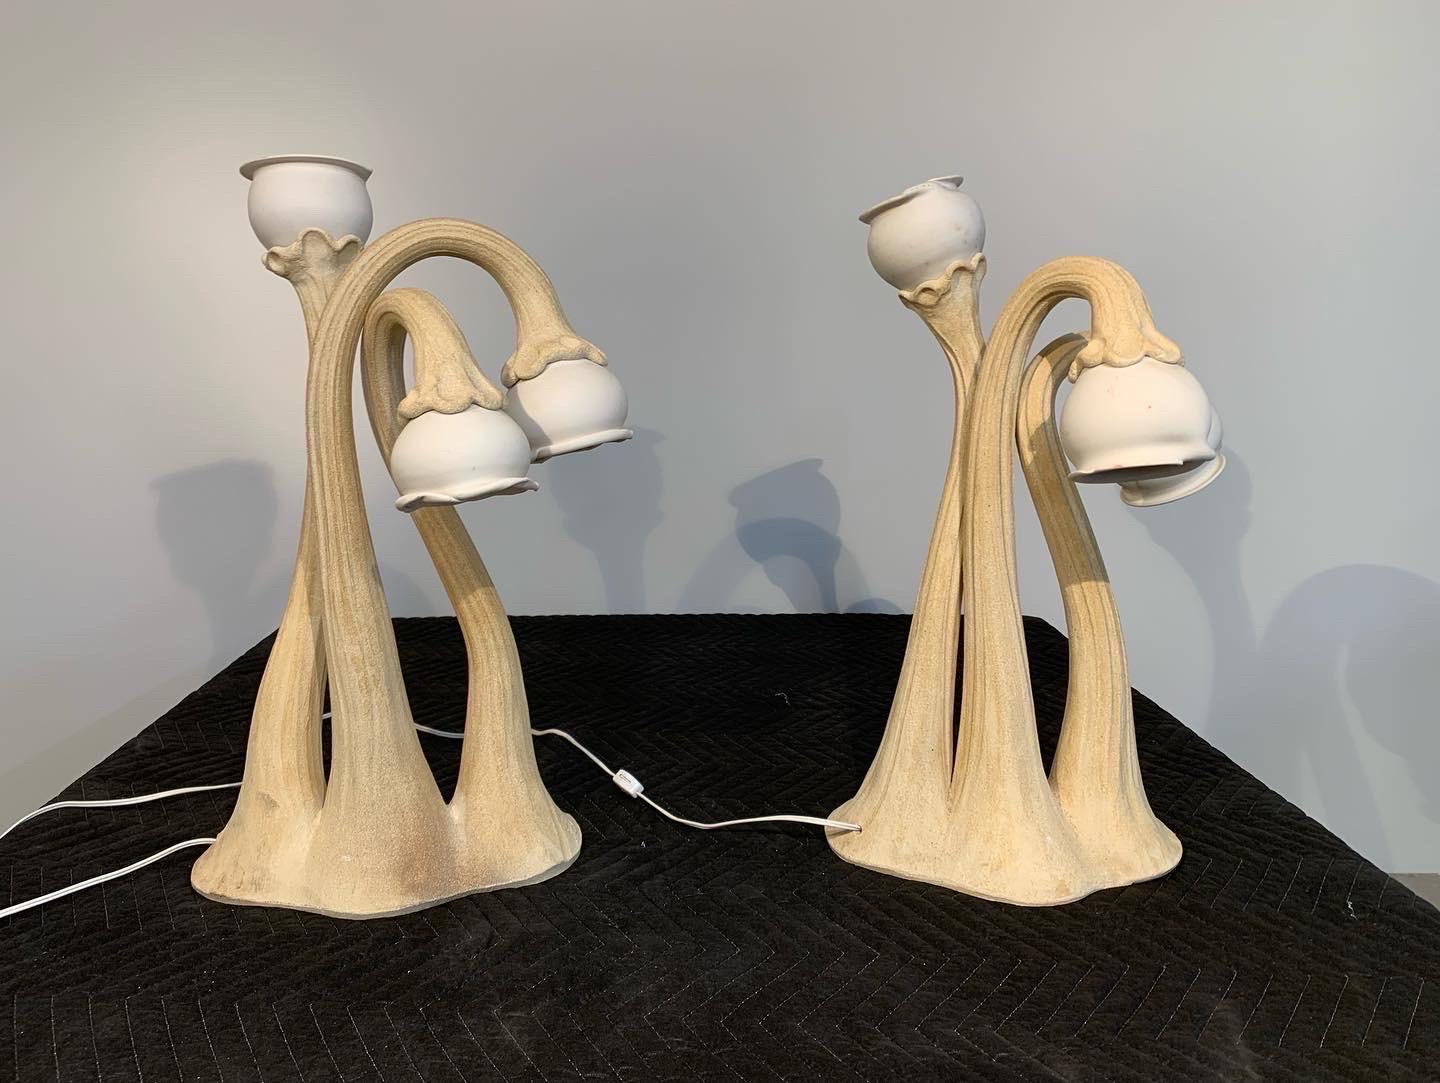 A rare pair of 3-stem handmade ceramic Calla Lilly lamps by Doug Blum 
Circa 1980 Each Standing 32” Tall
Very nice overall condition having 2 tiny chips as pointed out in the images provided. 
These will be hand delivered into your home after